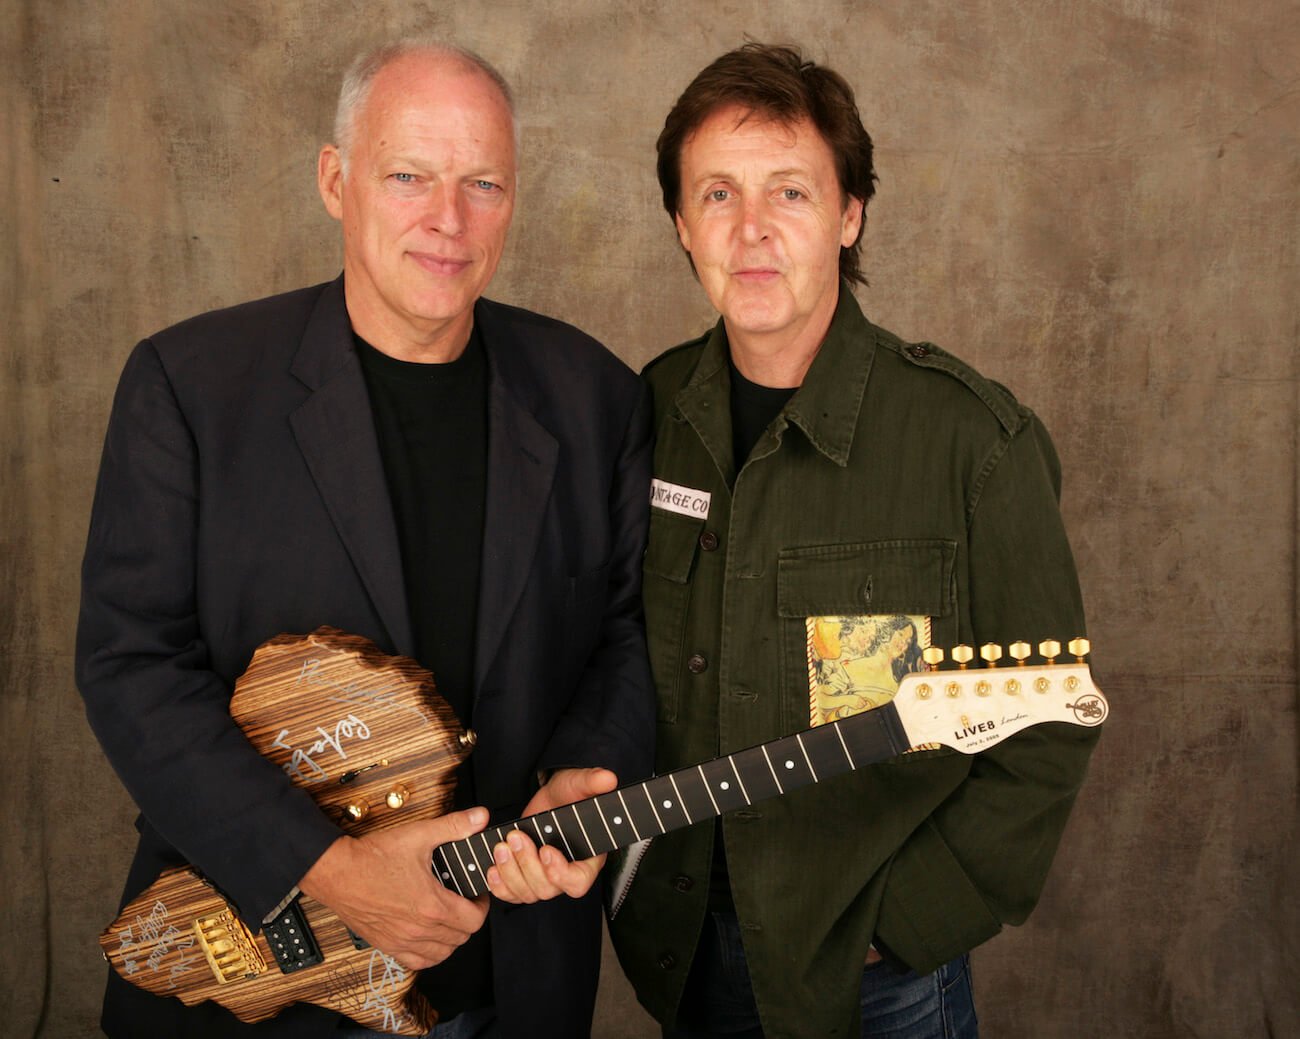 Paul McCartney and David Gilmour posing for Live 8 London in 2005.